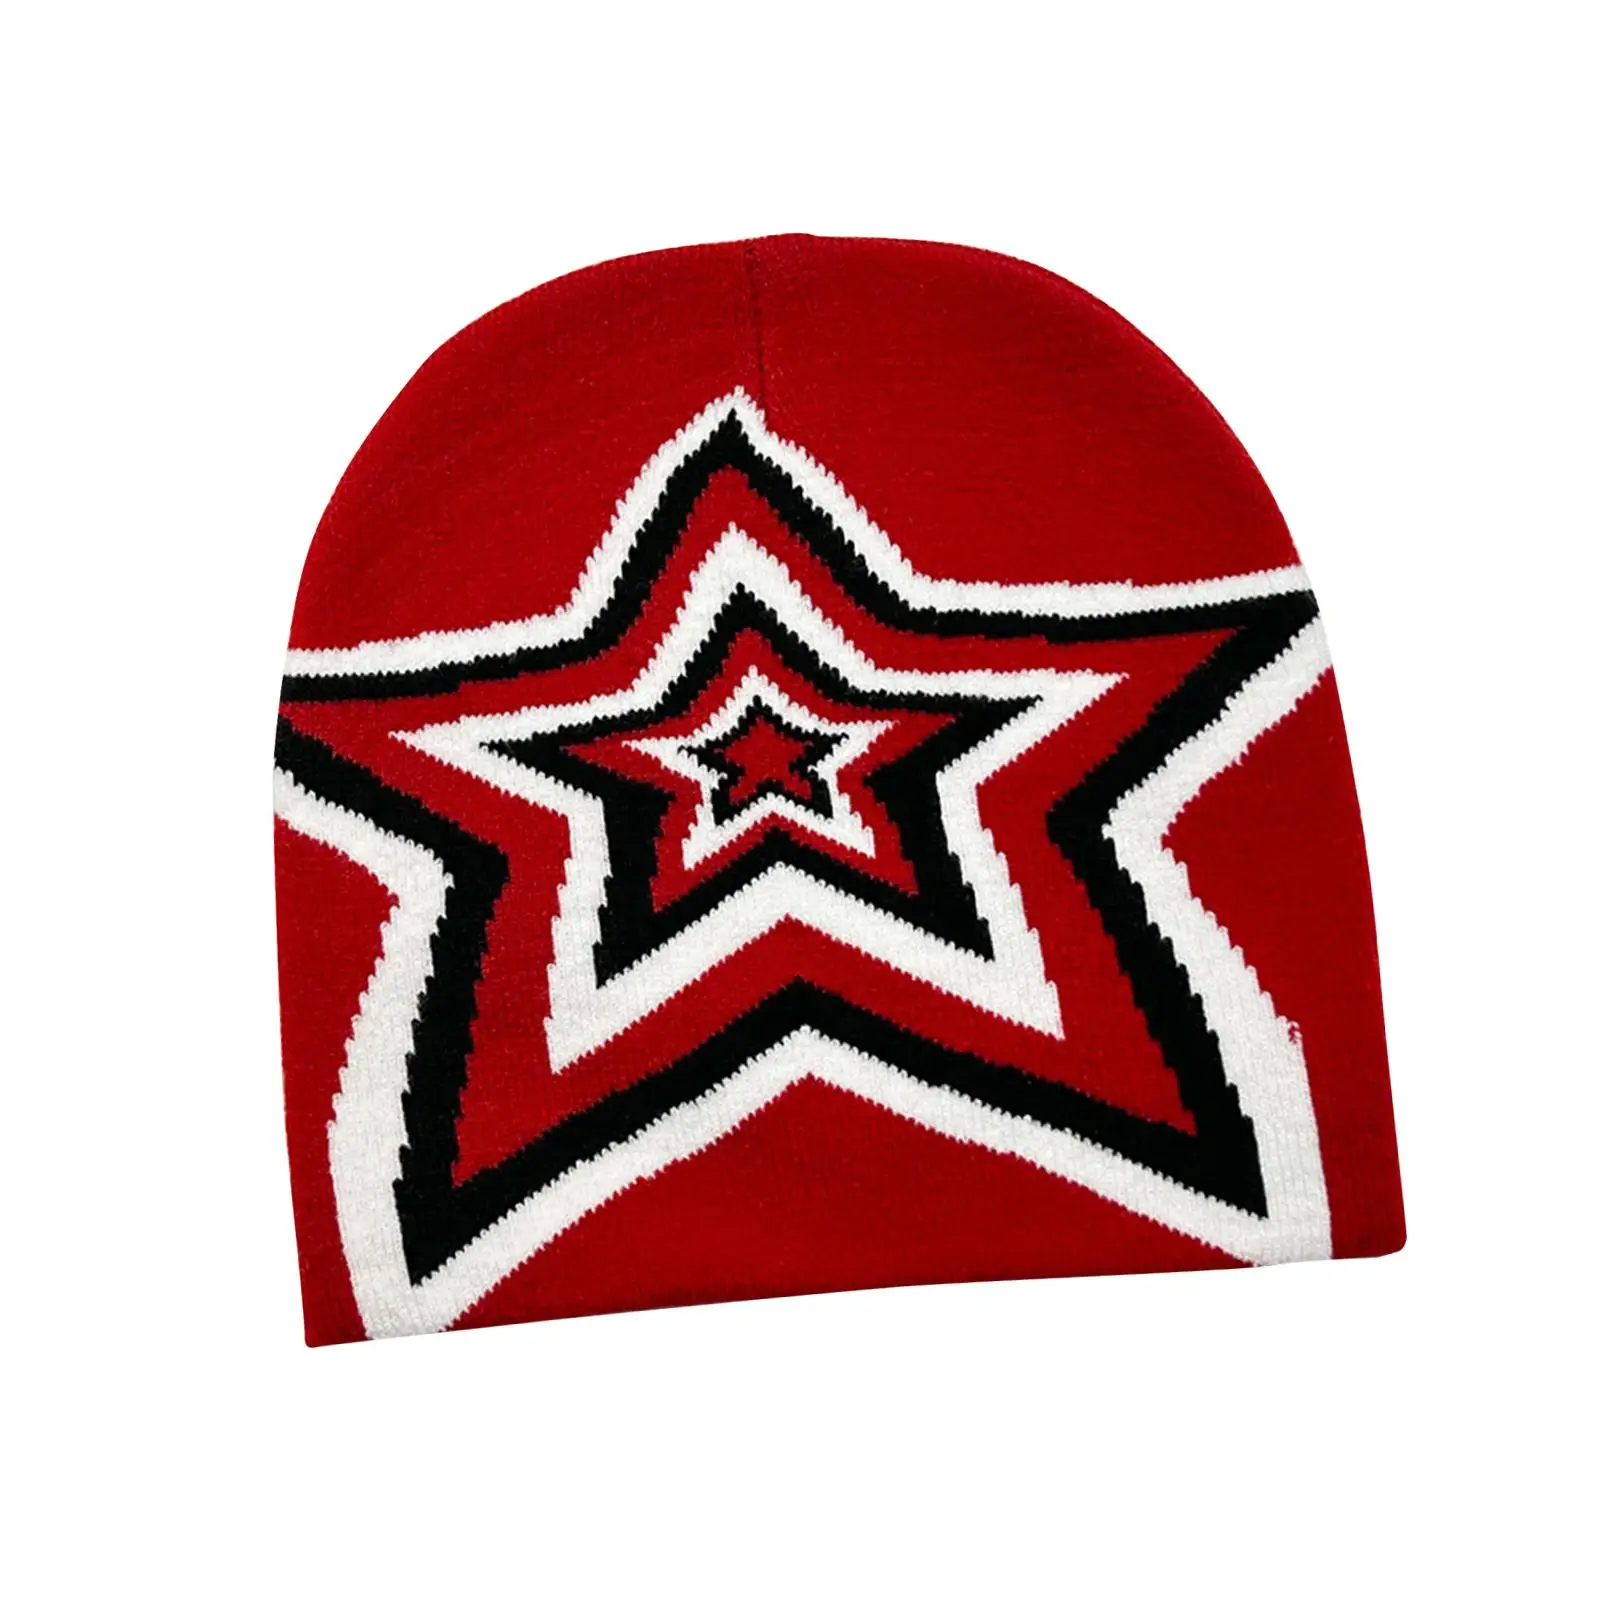 Knit Beanie Soft Knitted Hat Fashion Hip Hop Casual Acrylic Knit Hats Star Pattern Warm Cap for Skiing Outdoor Travel Dating